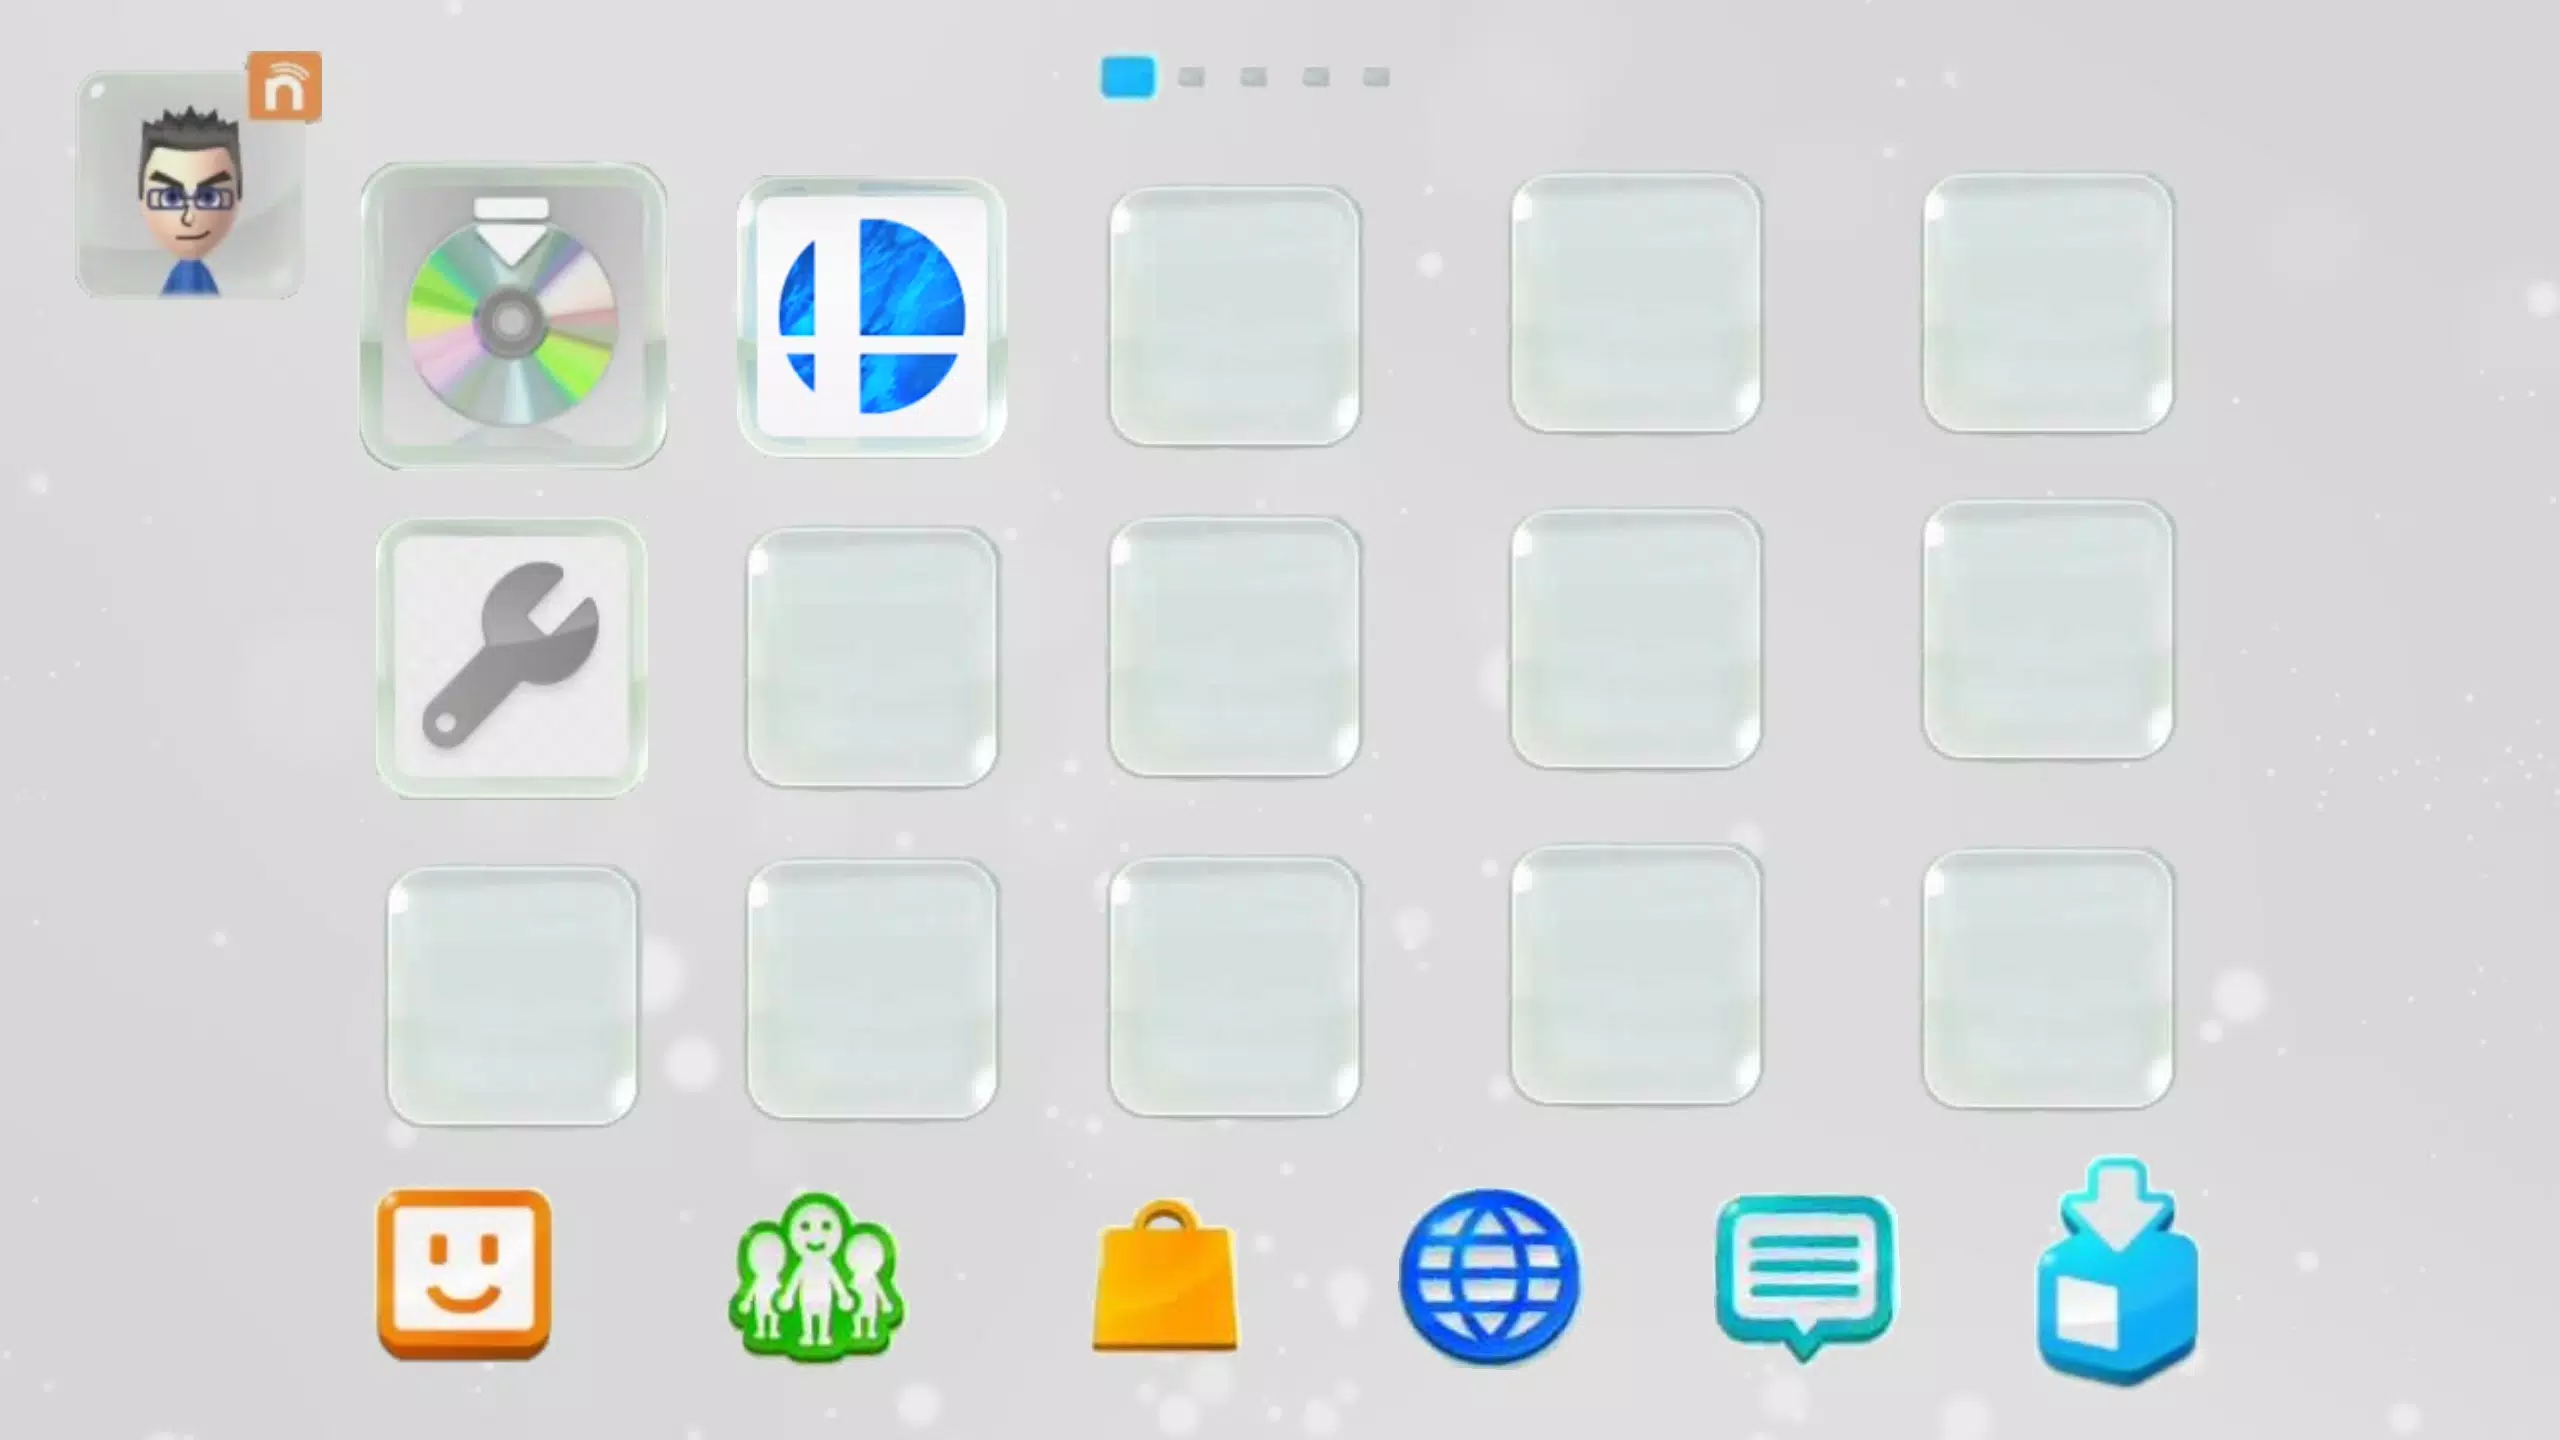 Wii U Simulator for Android - APK Download